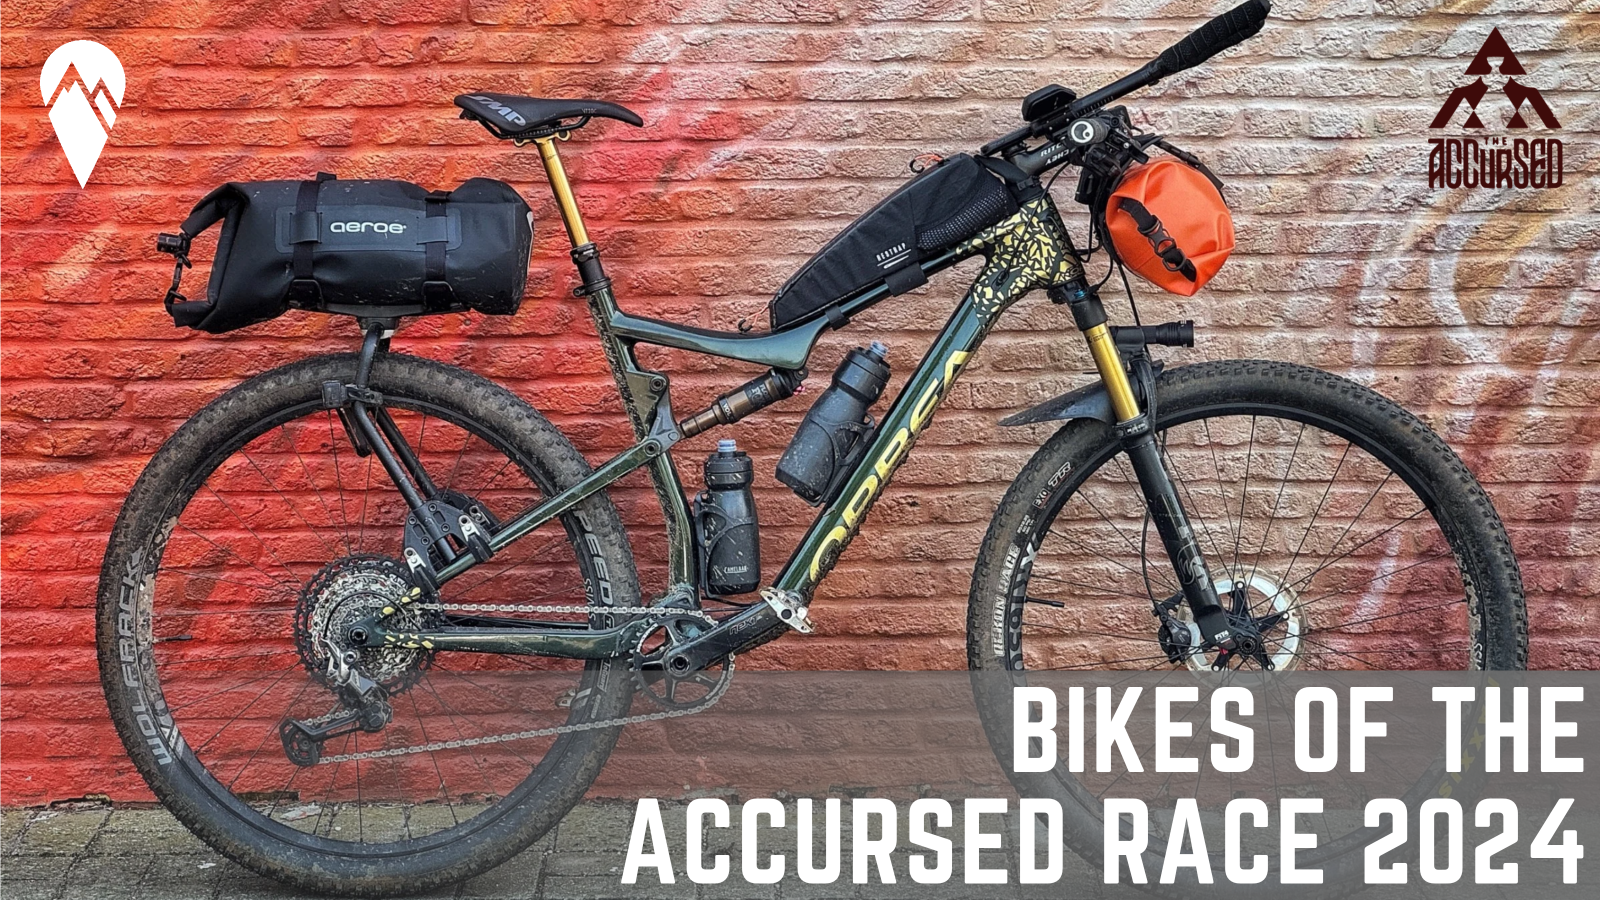 Bikes of The Accursed Race 2024